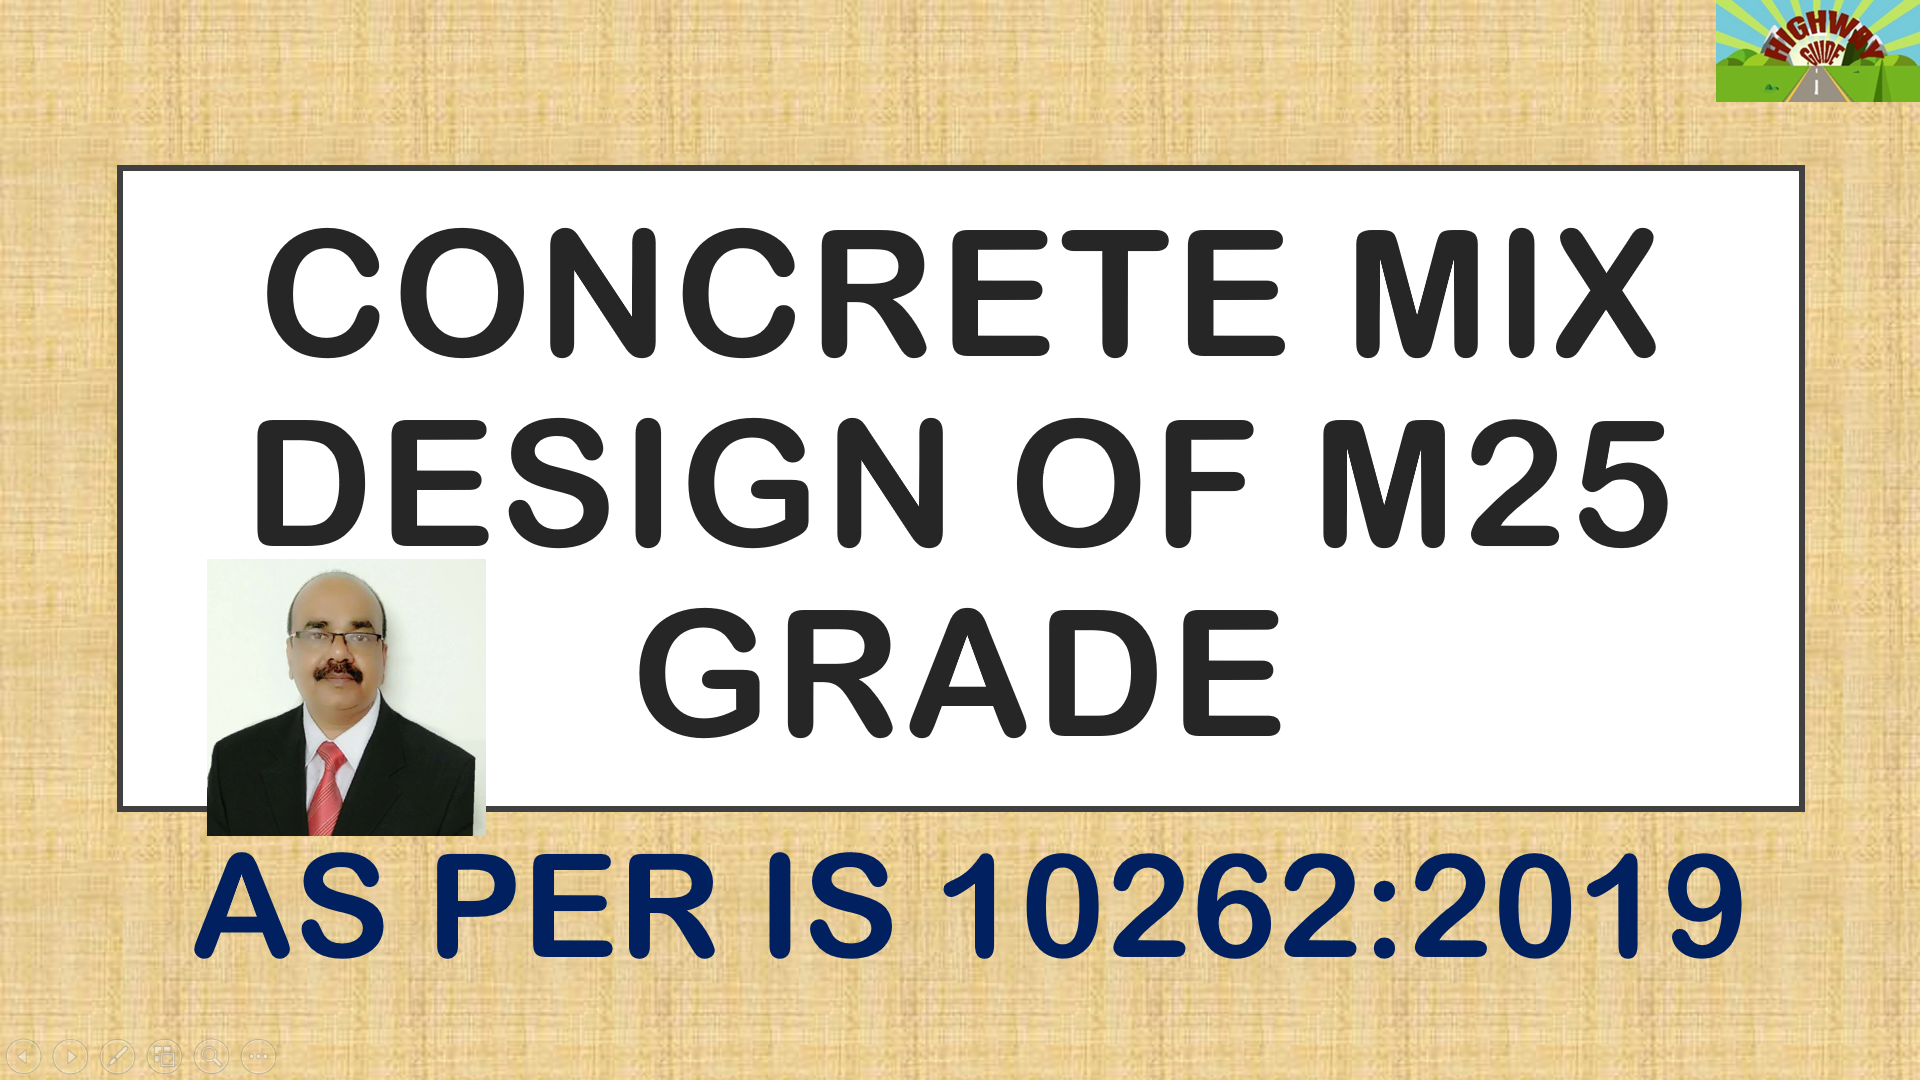 CONCRETE MIX DESIGN OF M25 GRADE – AS PER IS 10262:2019 – HIGHWAY GUIDE